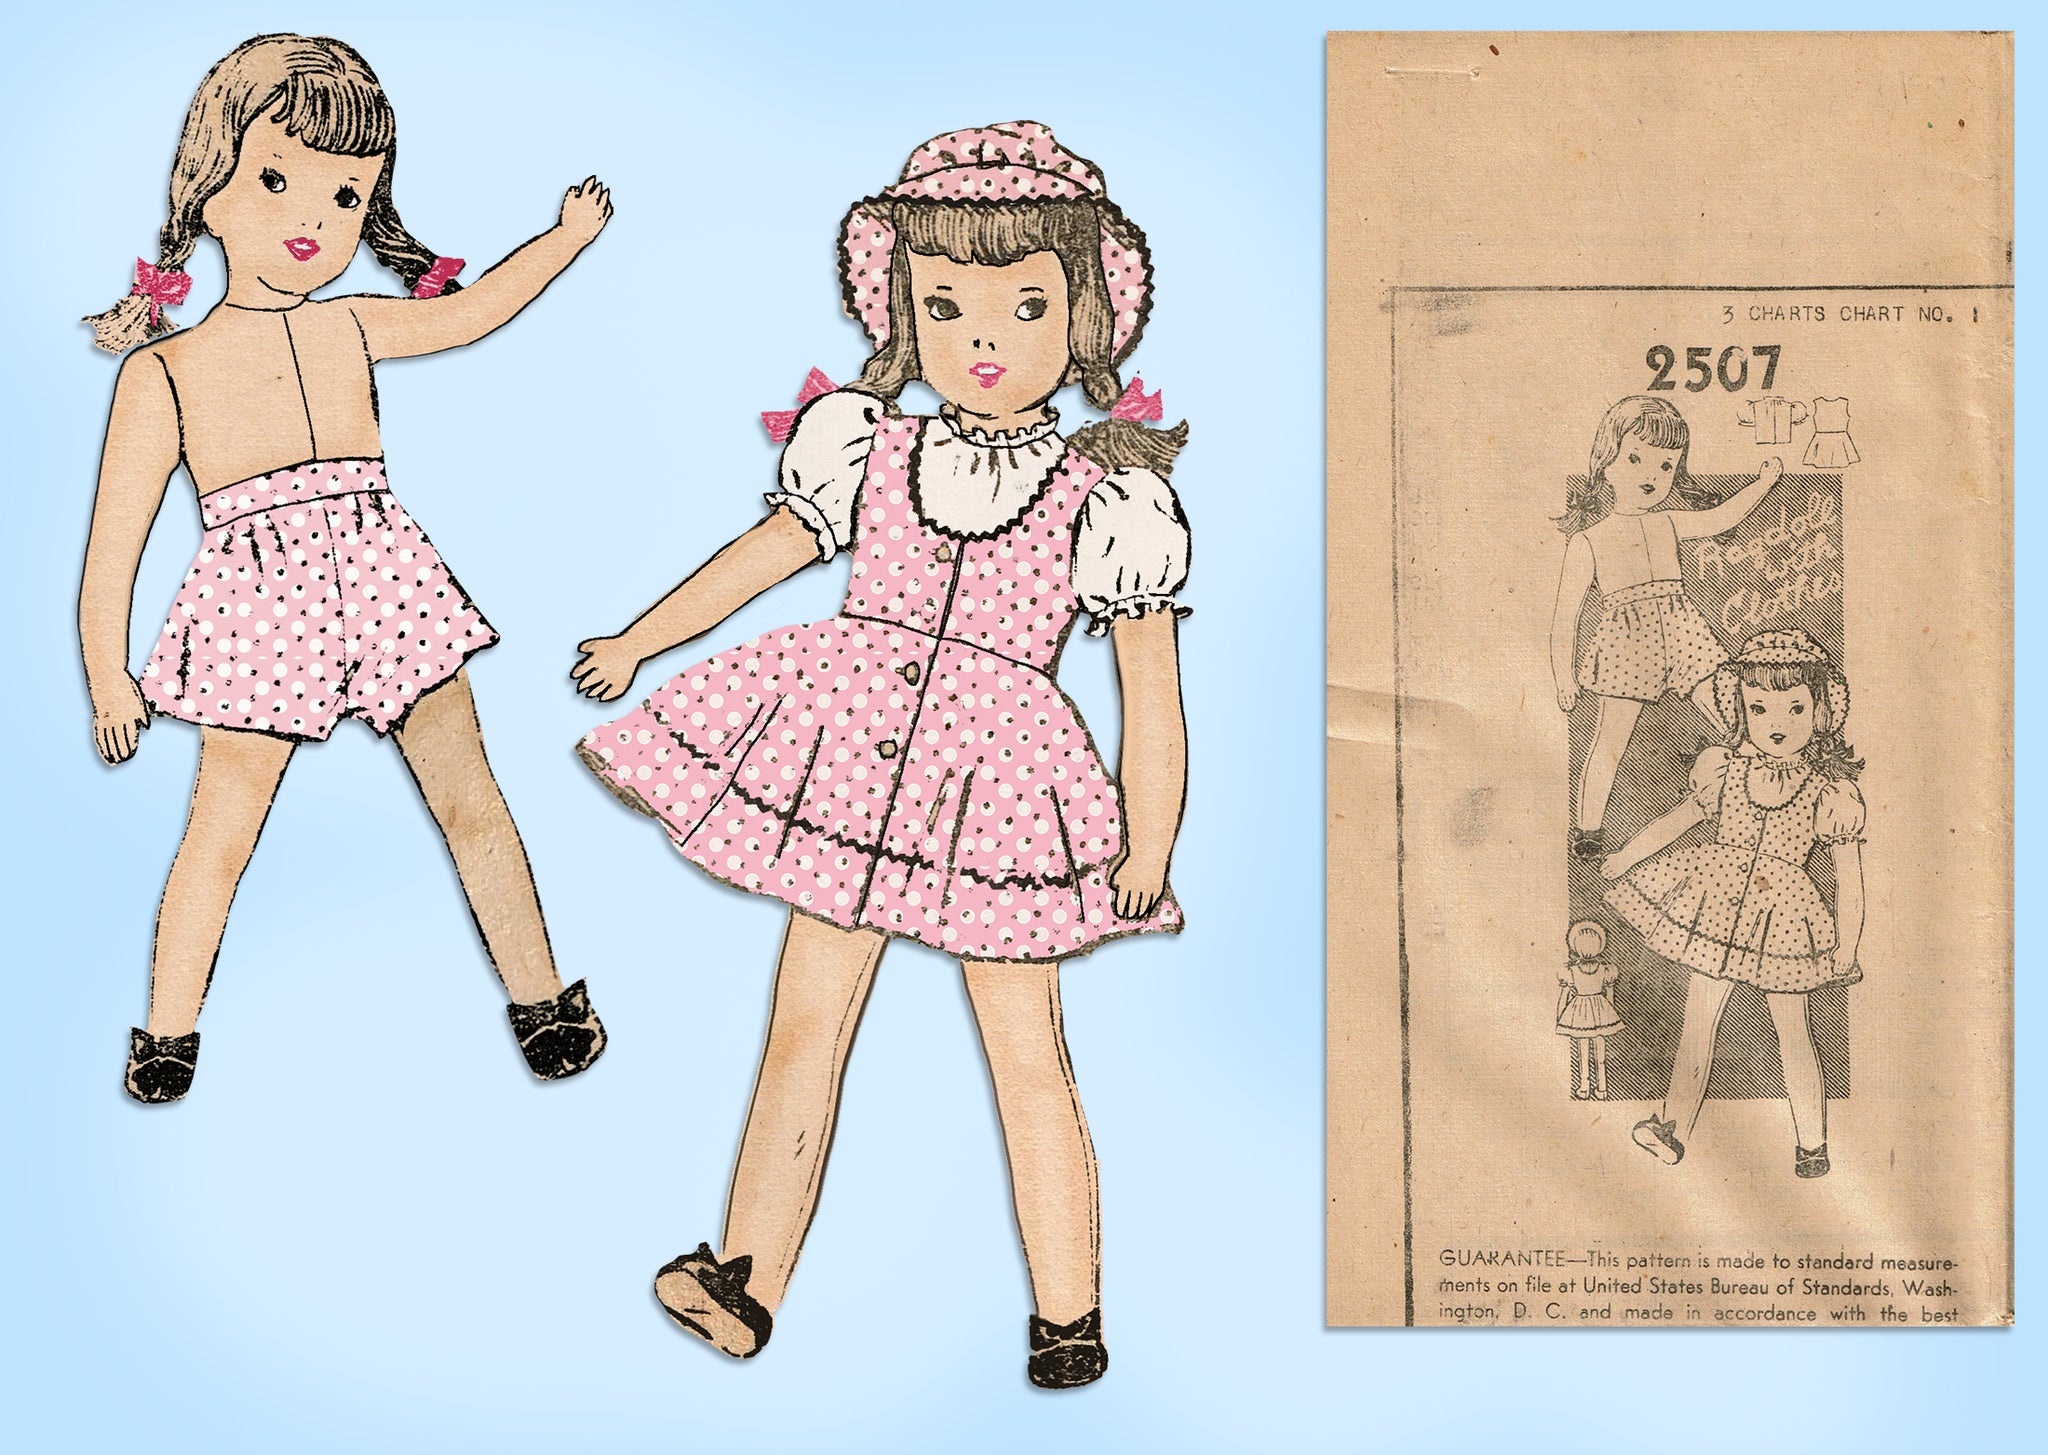 How To Make Doll Clothes: No Sewing Required! { with 2 FREE Patterns! } -  Chaotically Yours